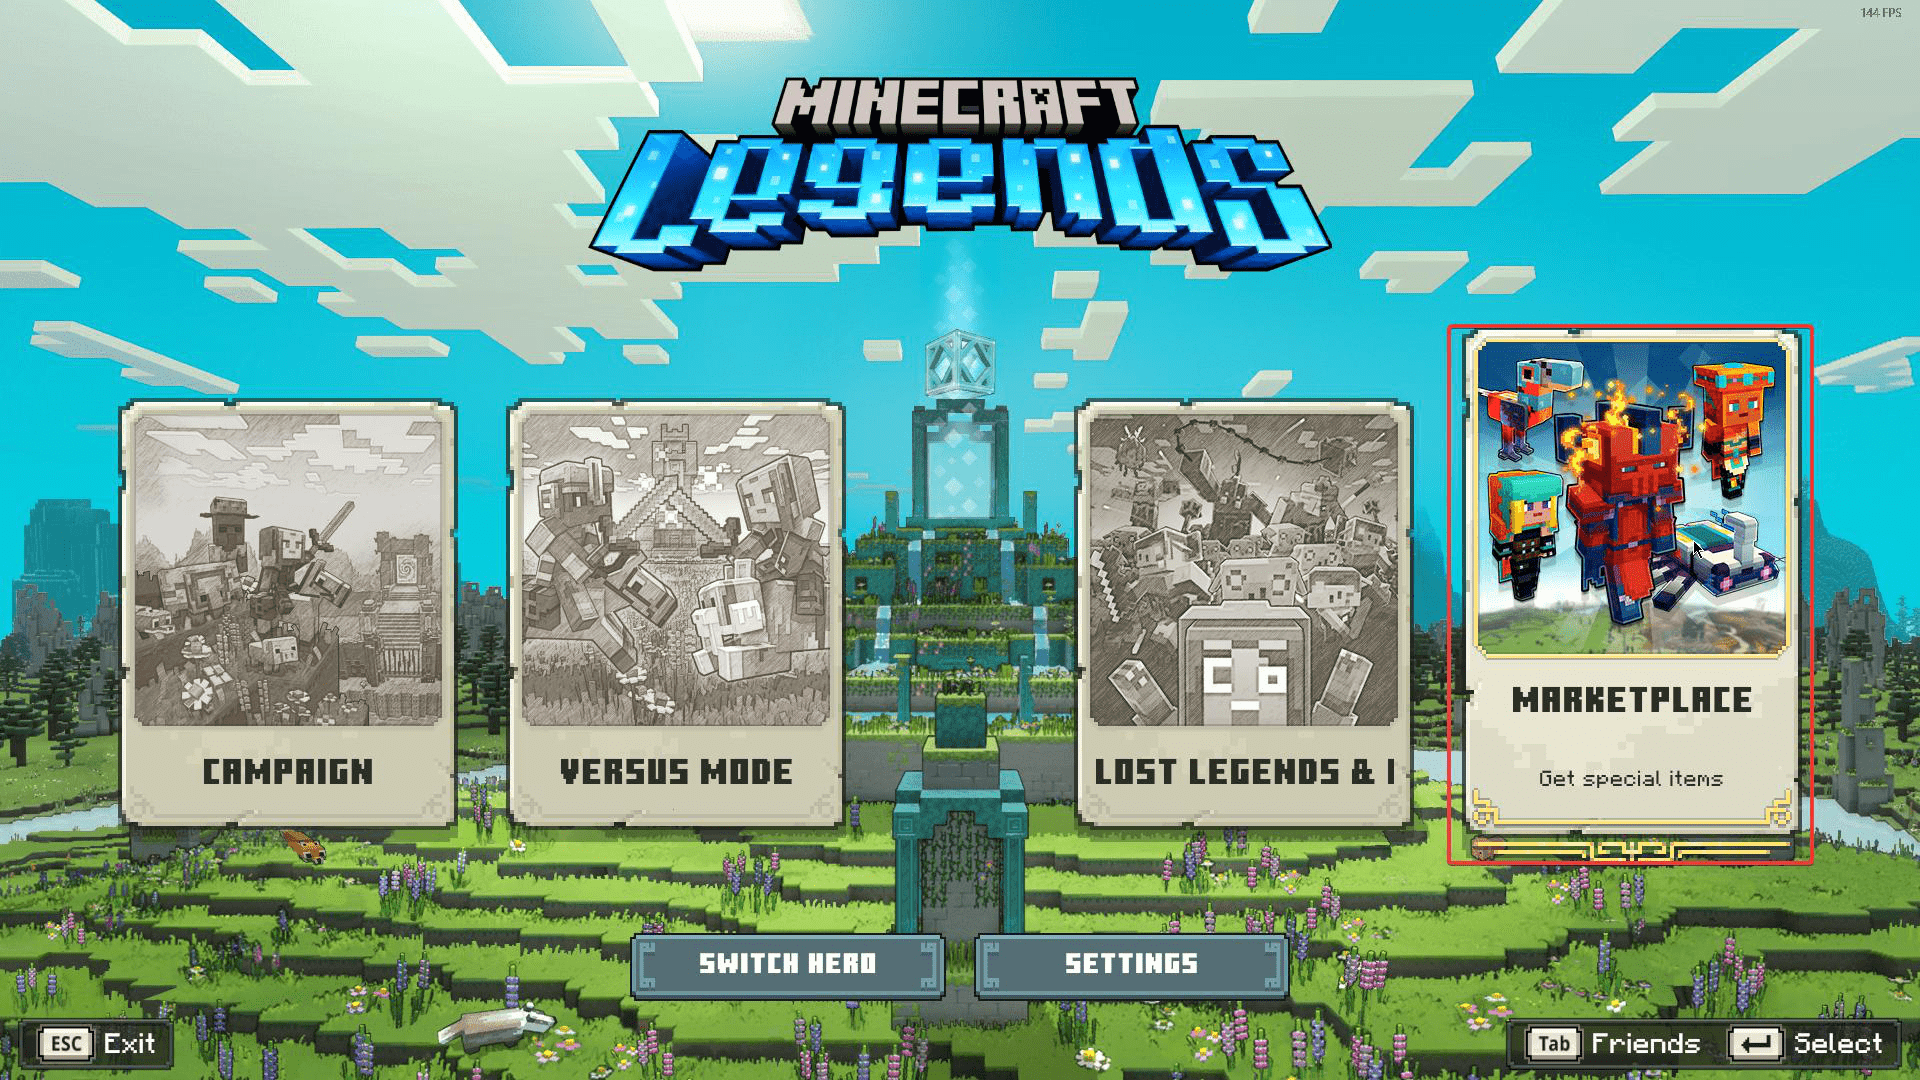 Minecraft Legends - Guide how to redeem the Deluxe Edition DLC - 1. In the Main Menu, head to the Marketplace - 73C3DA7